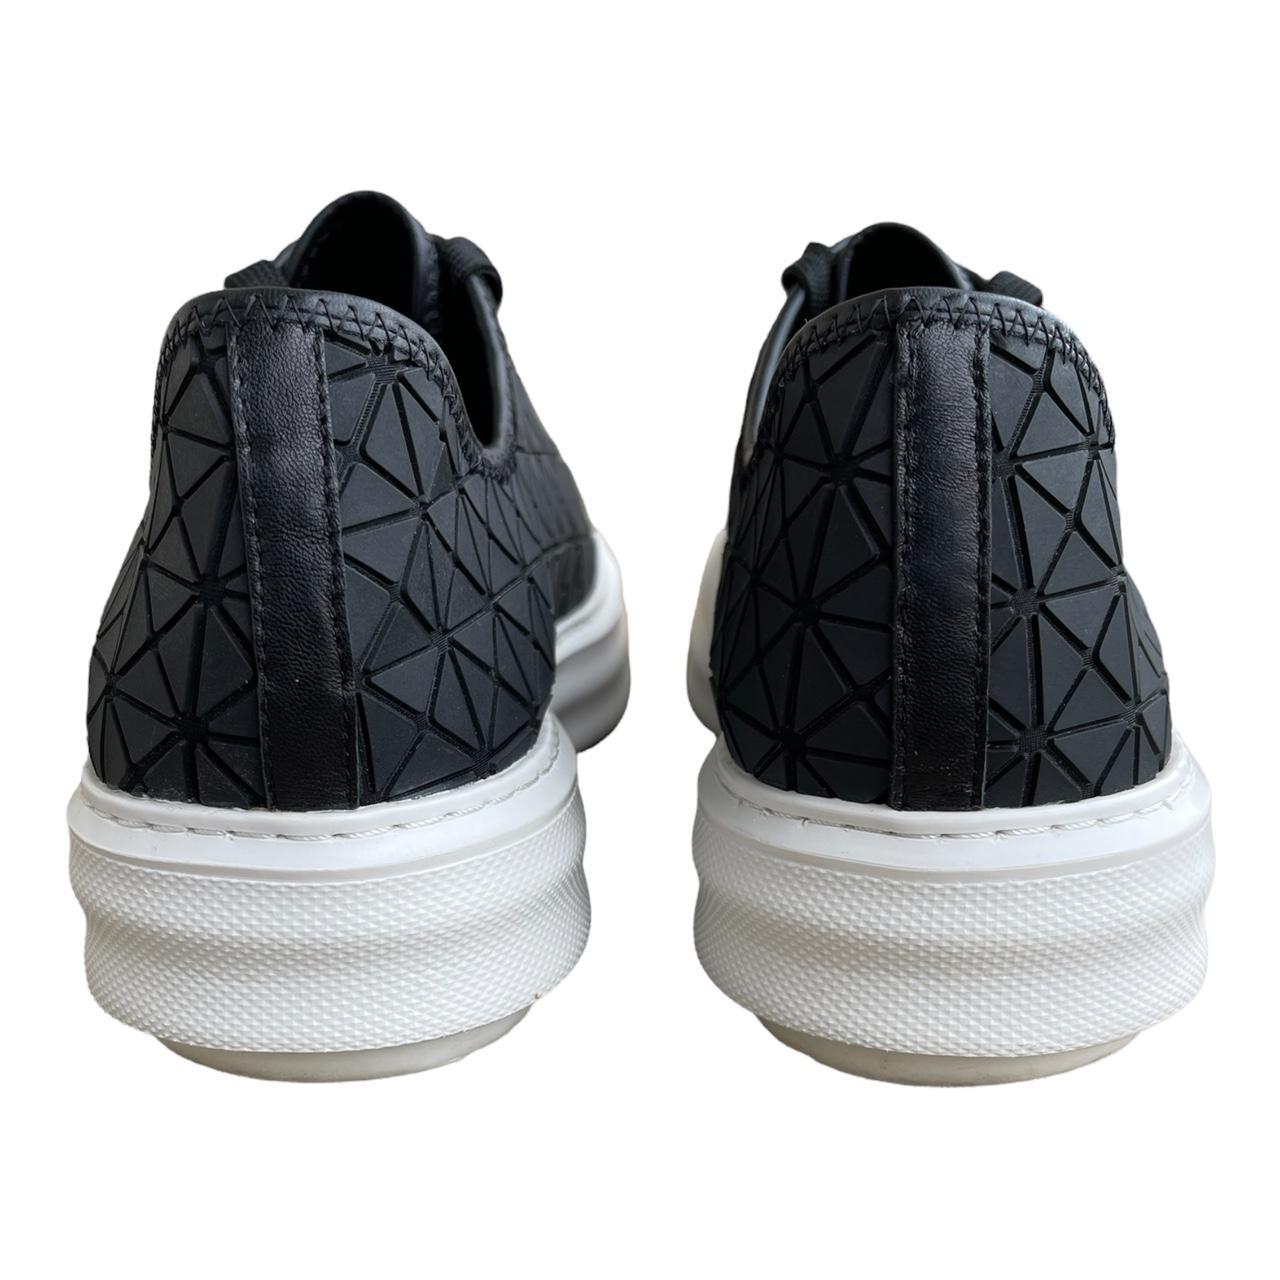 All Black Women's Black and White Trainers (2)